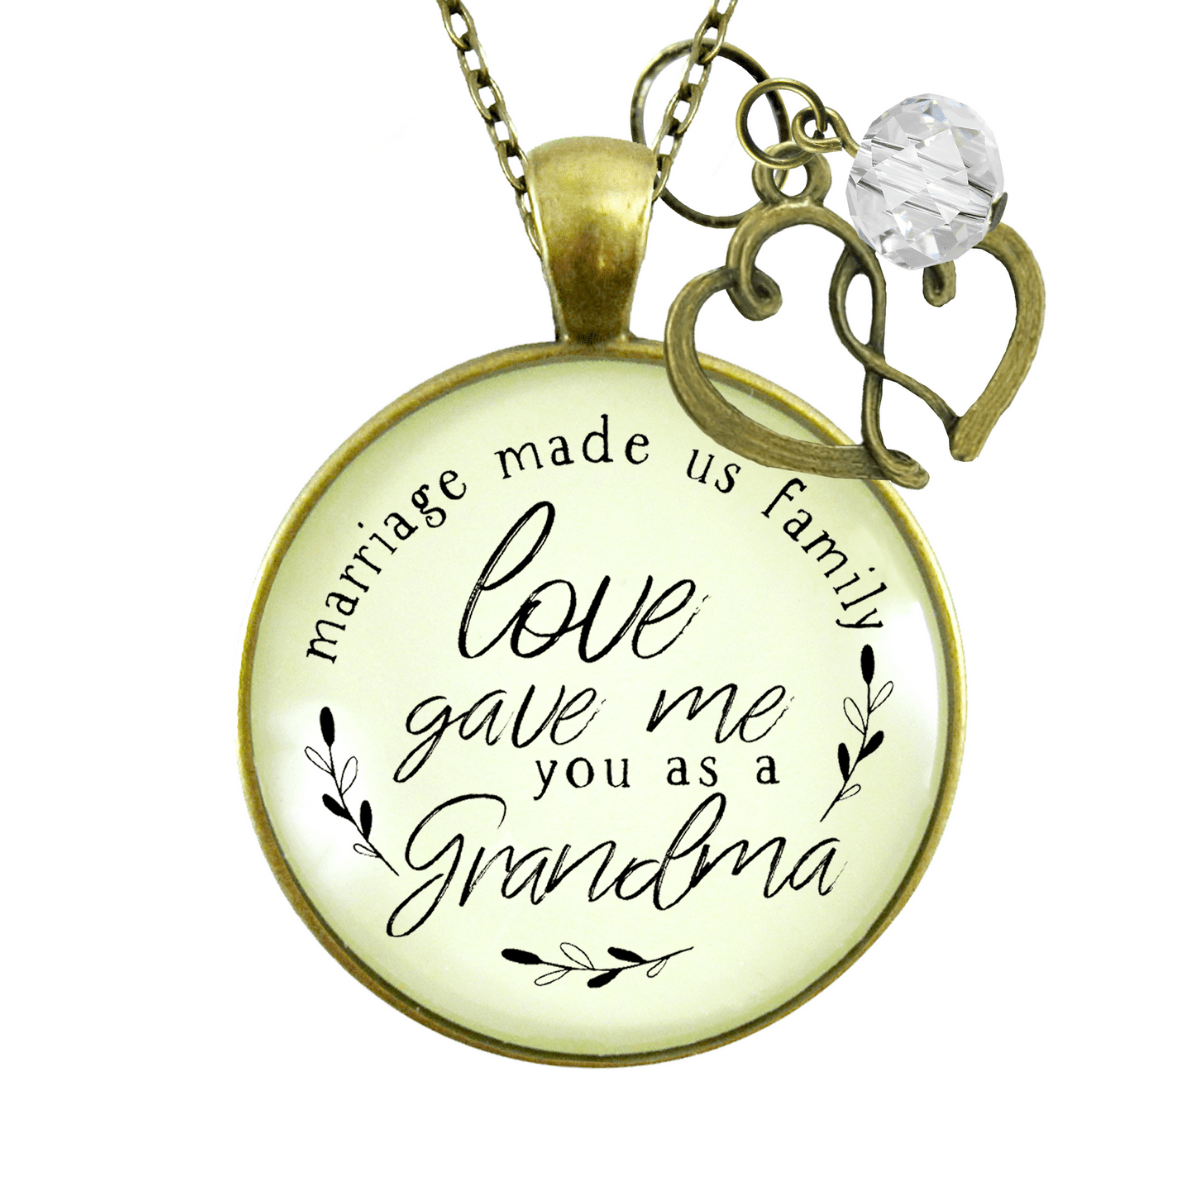 Gutsy Goodness Grandma Gift for Necklace Marriage Made Us Family Wedding Jewelry - Gutsy Goodness Handmade Jewelry;Grandma Gift For Necklace Marriage Made Us Family Wedding Jewelry - Gutsy Goodness Handmade Jewelry Gifts